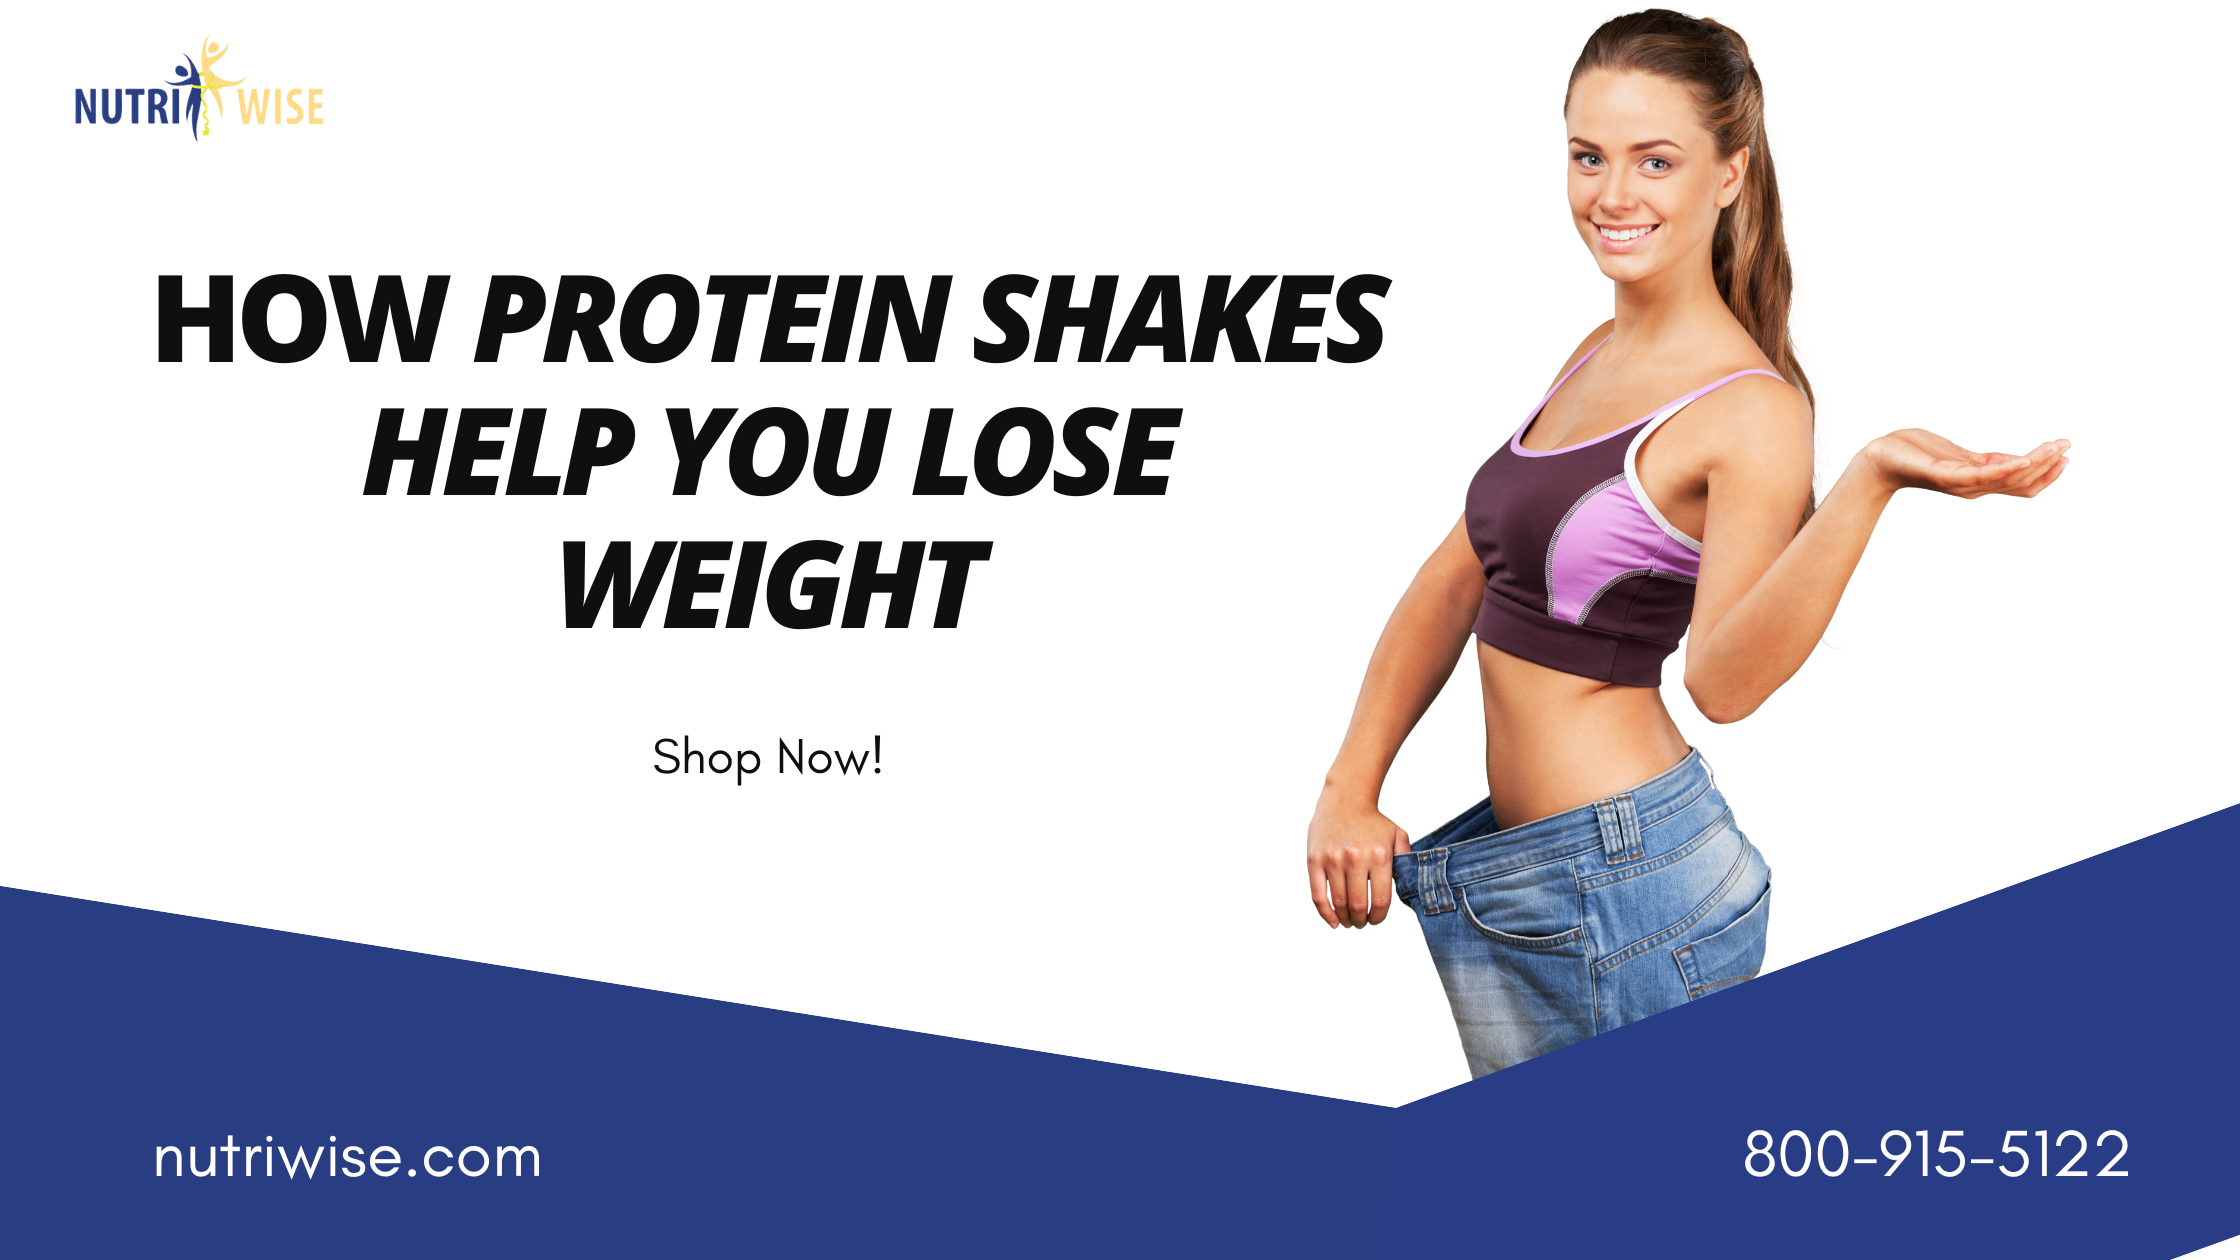 Protein Shake Help In Weight Loss by Nutriwise Diet - Issuu